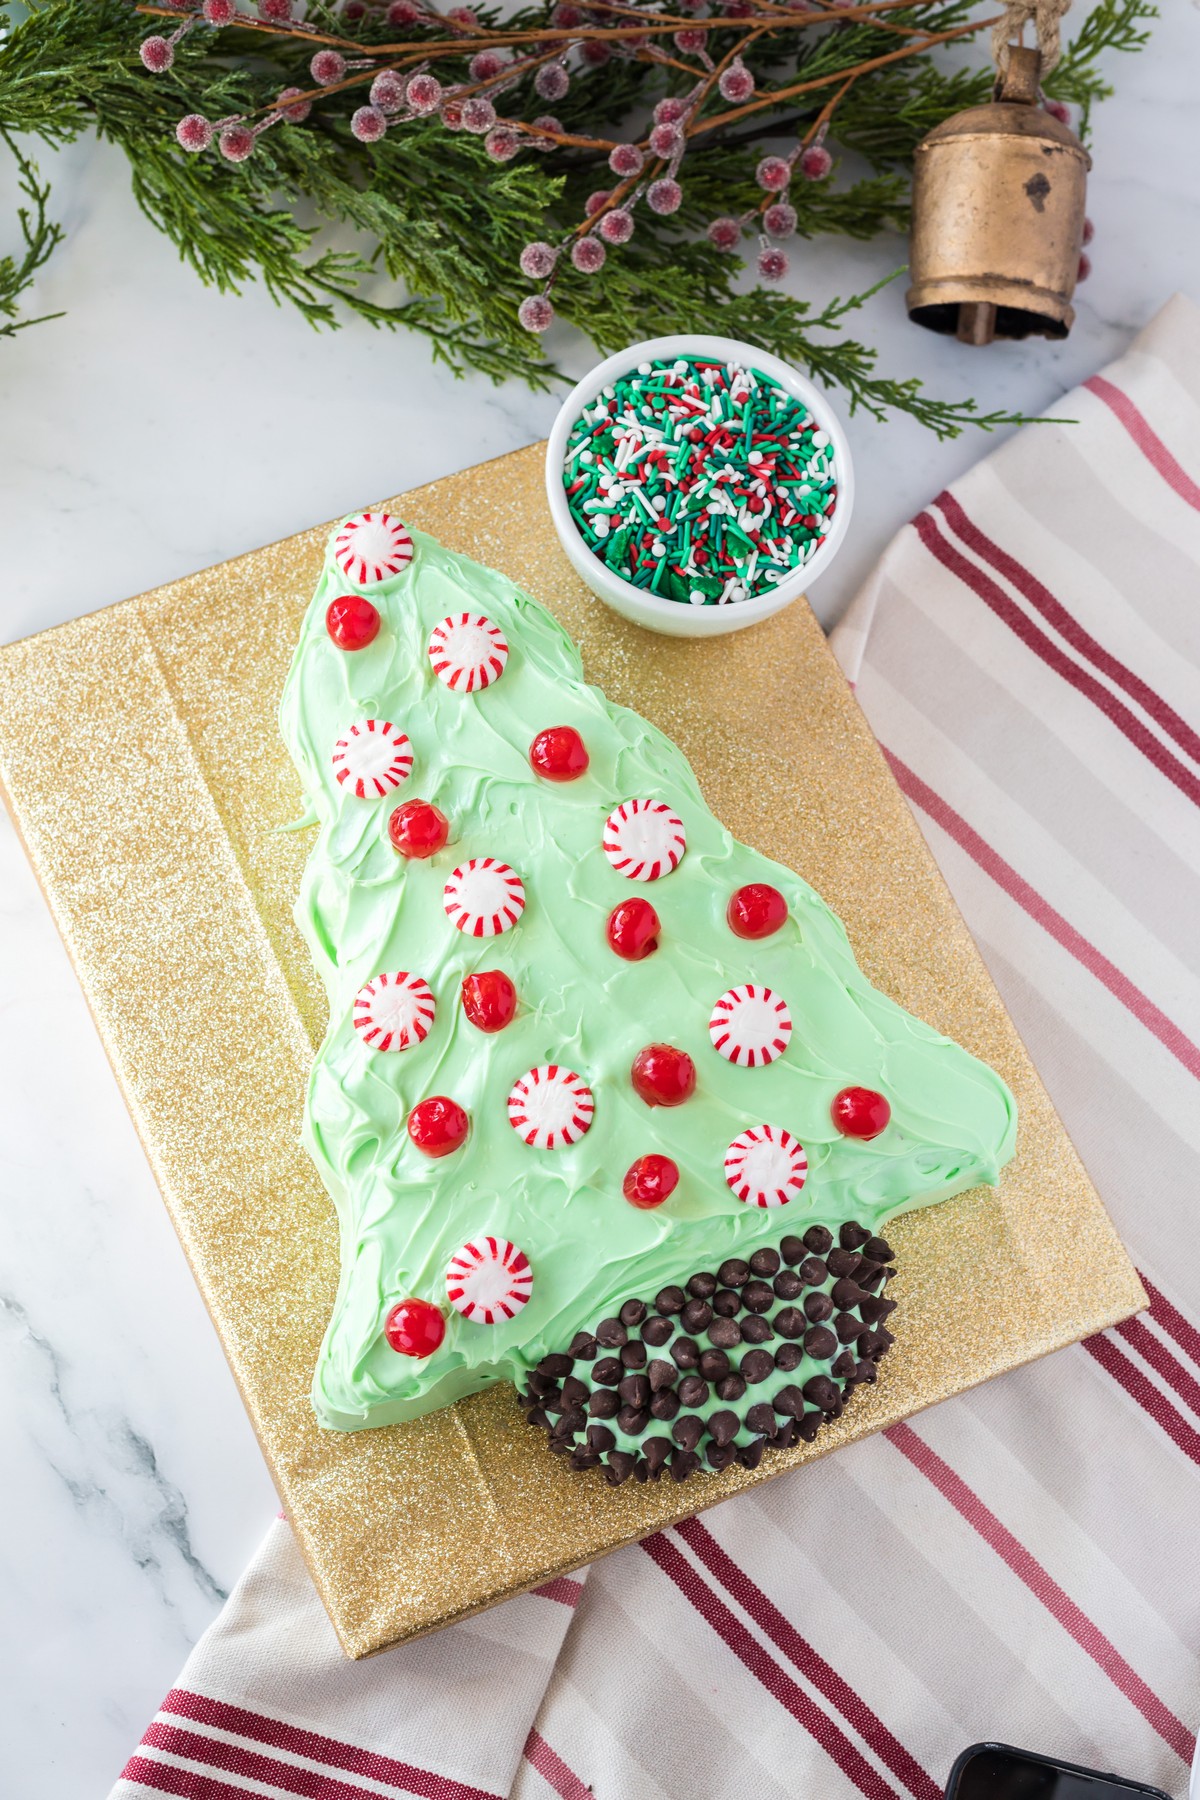 https://www.southerncravings.com/wp-content/uploads/2022/10/Christmas-Tree-Cake-17.jpg